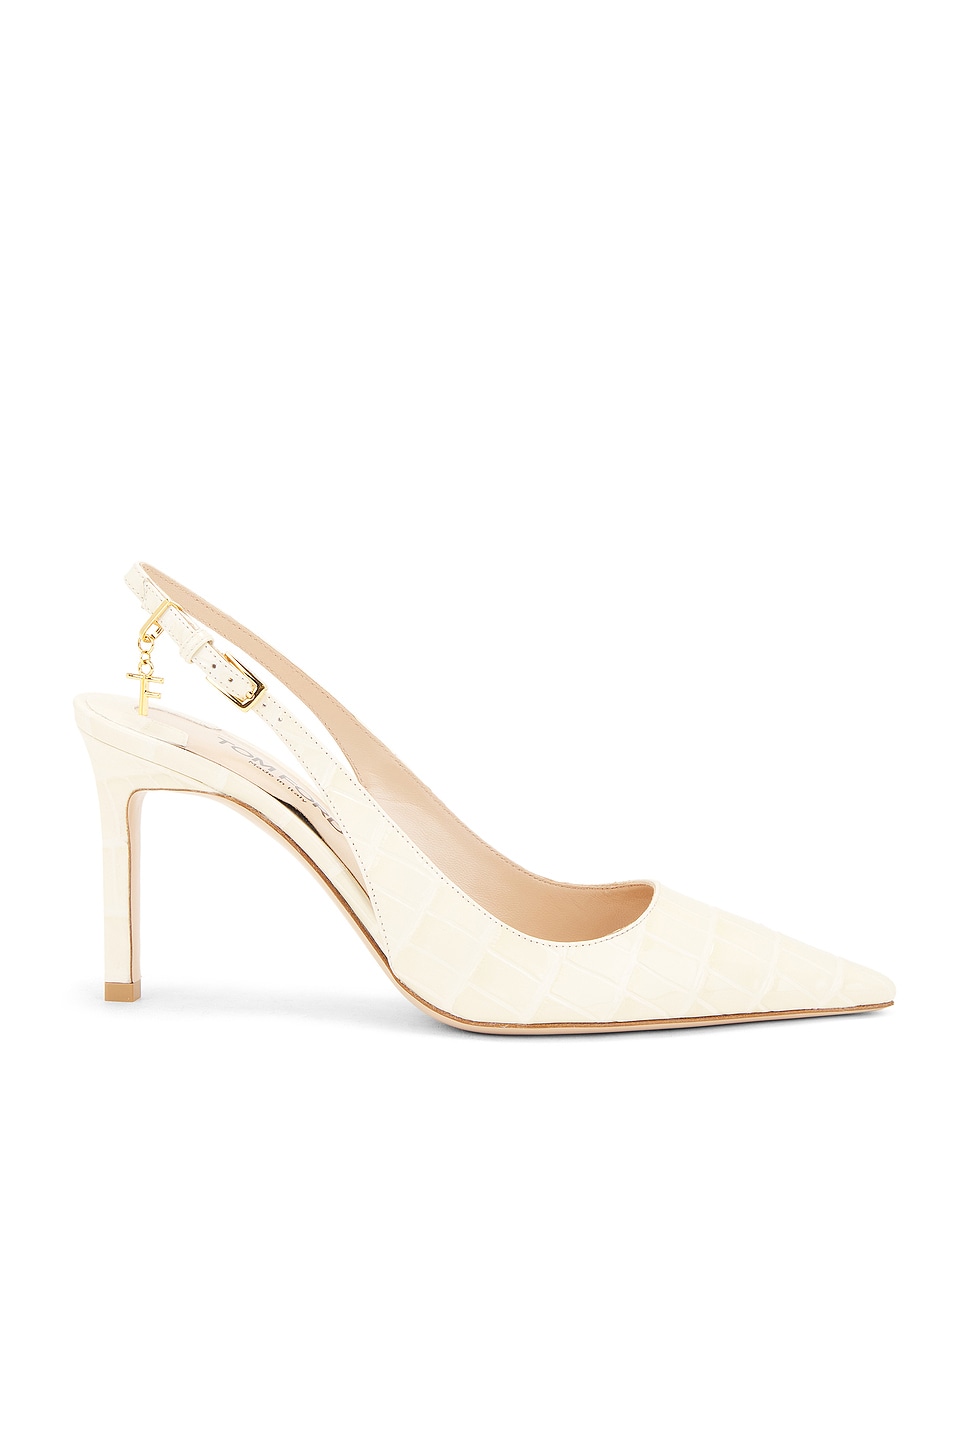 Image 1 of TOM FORD Glossy Stamped Croc Slingback 85 Pump in Ivory